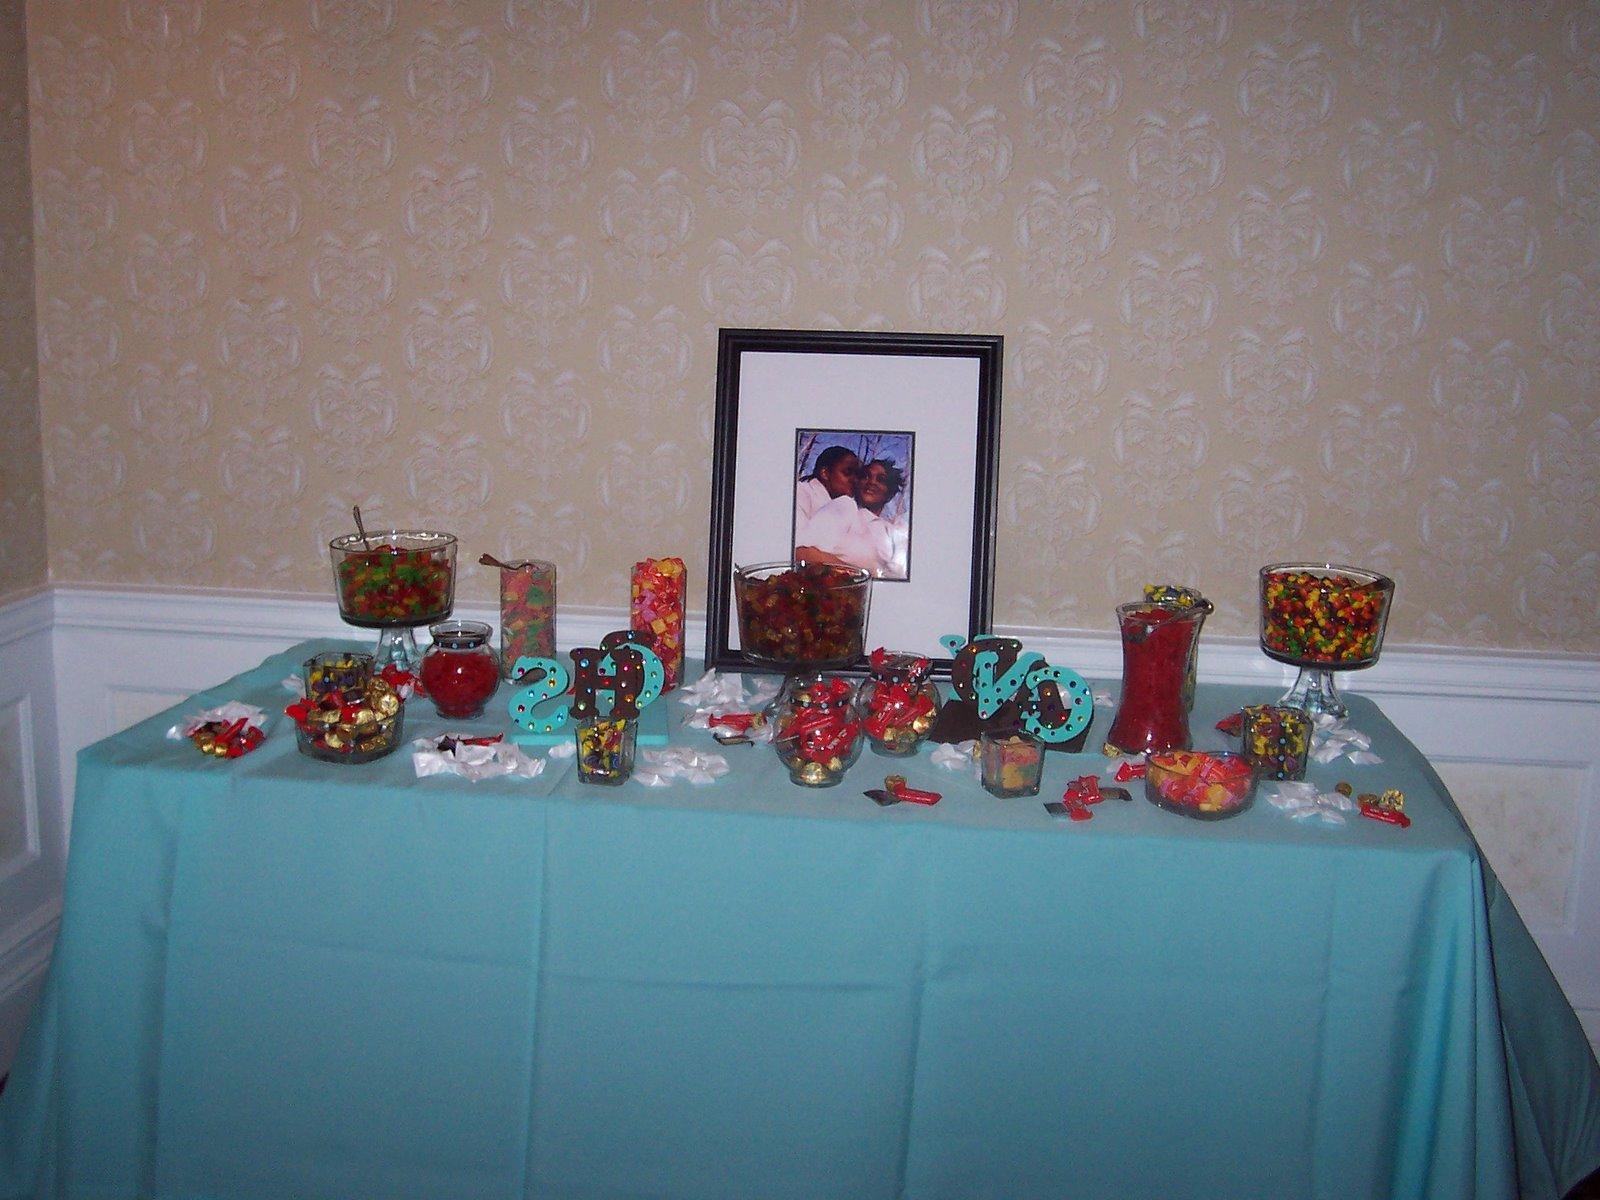 Nate wanted a candy buffet